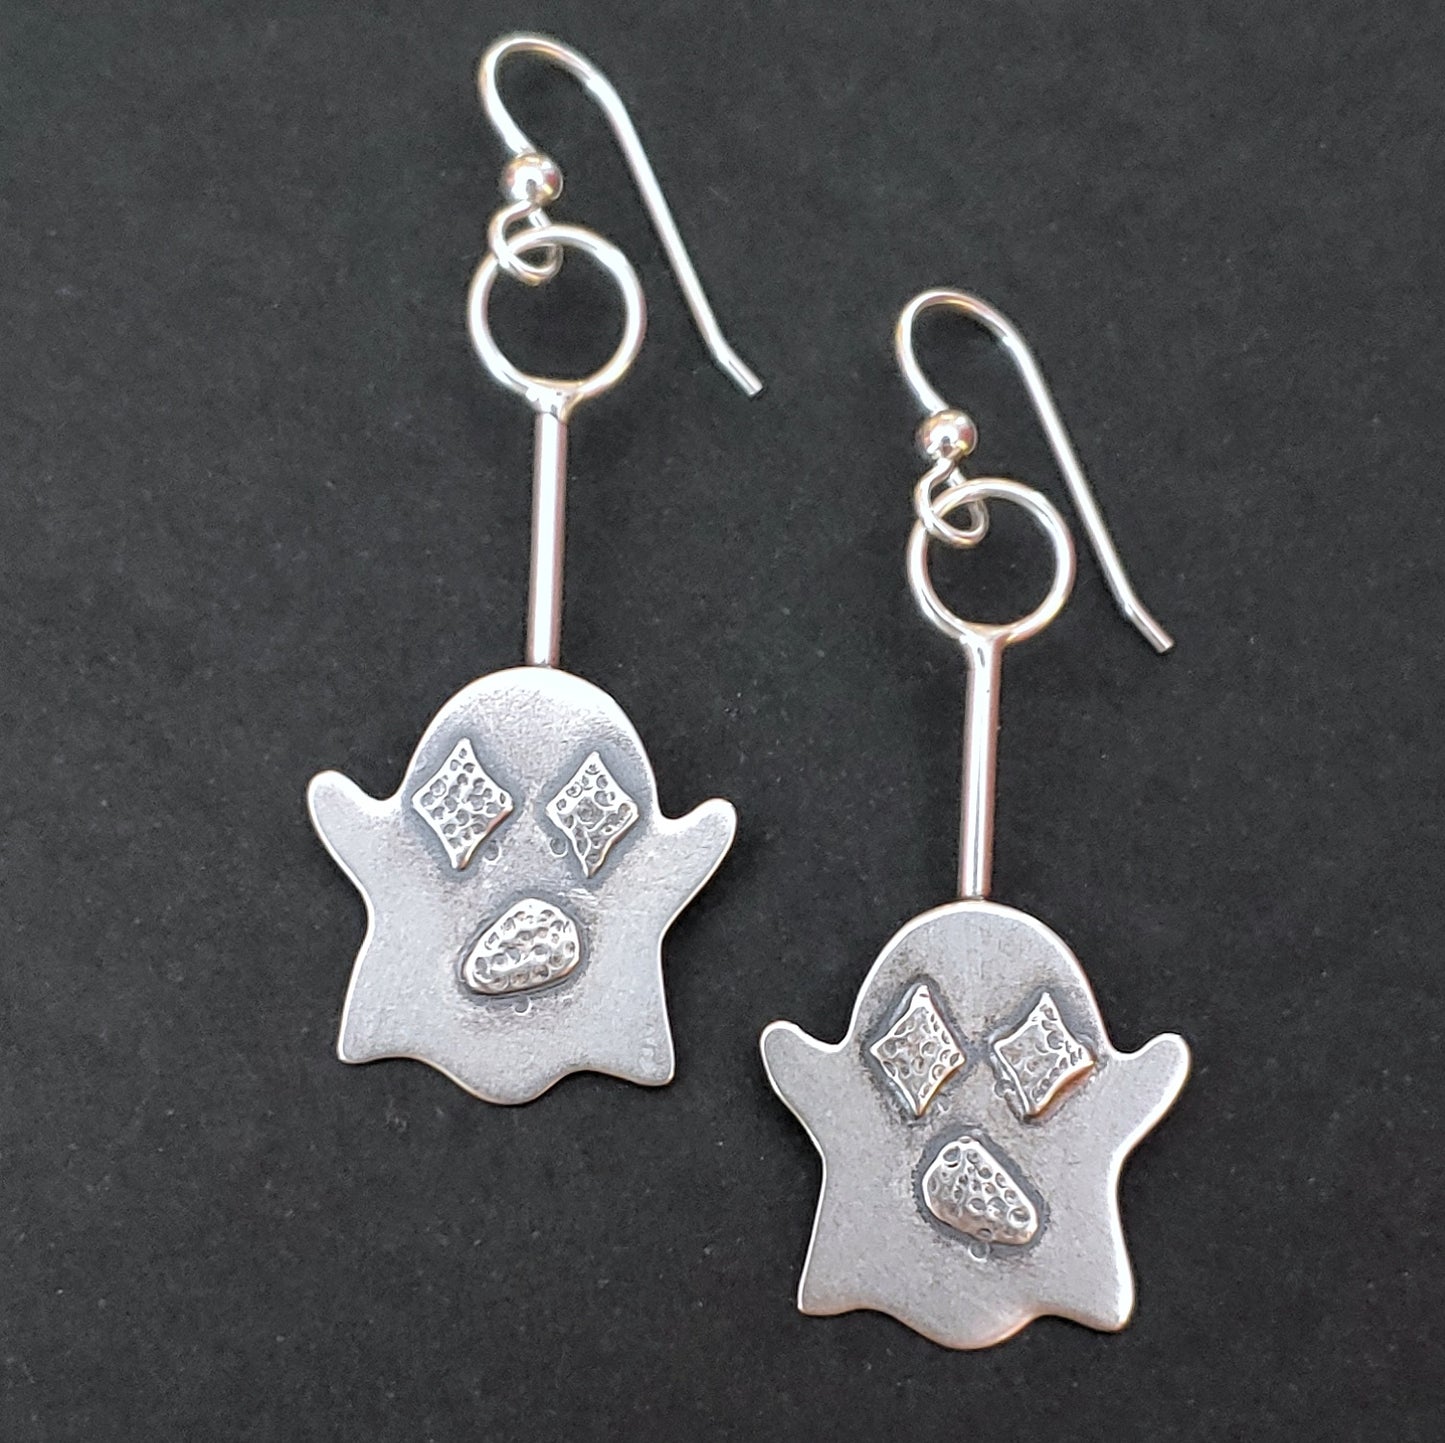 Cute sterling silver ghost earrings with retro diamond eyes on a black background.